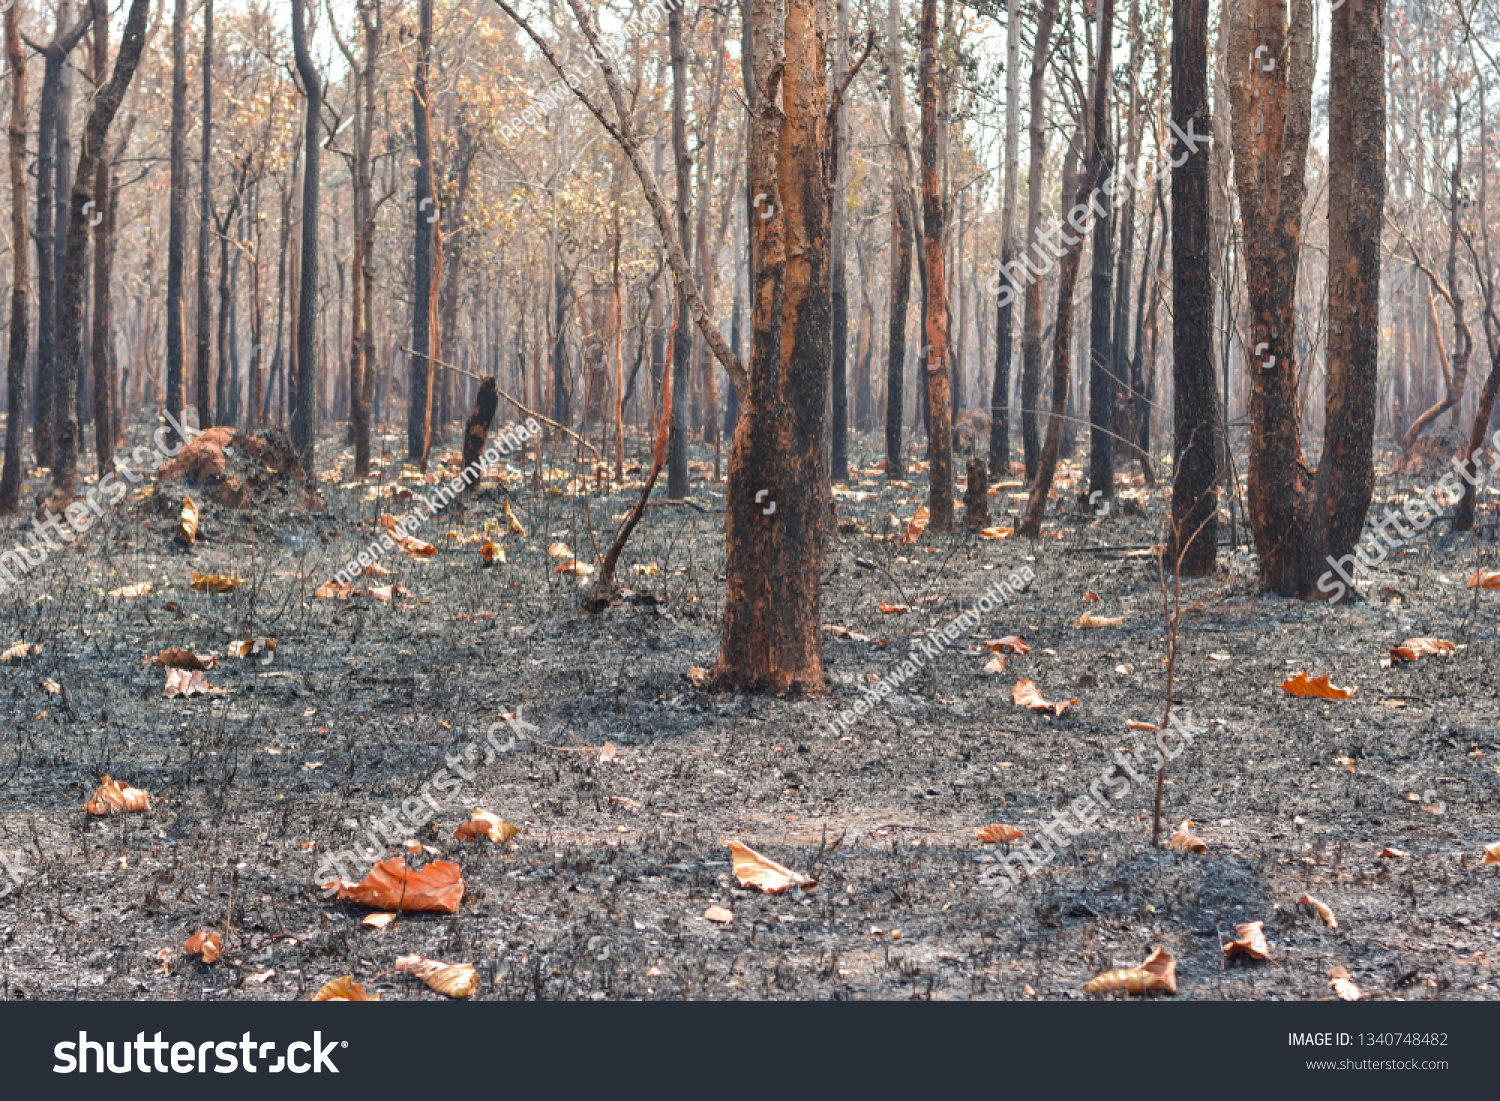 Fires, deciduous forests, mixed deciduous forests during the dry season of Southeast Asia
 #1340748482